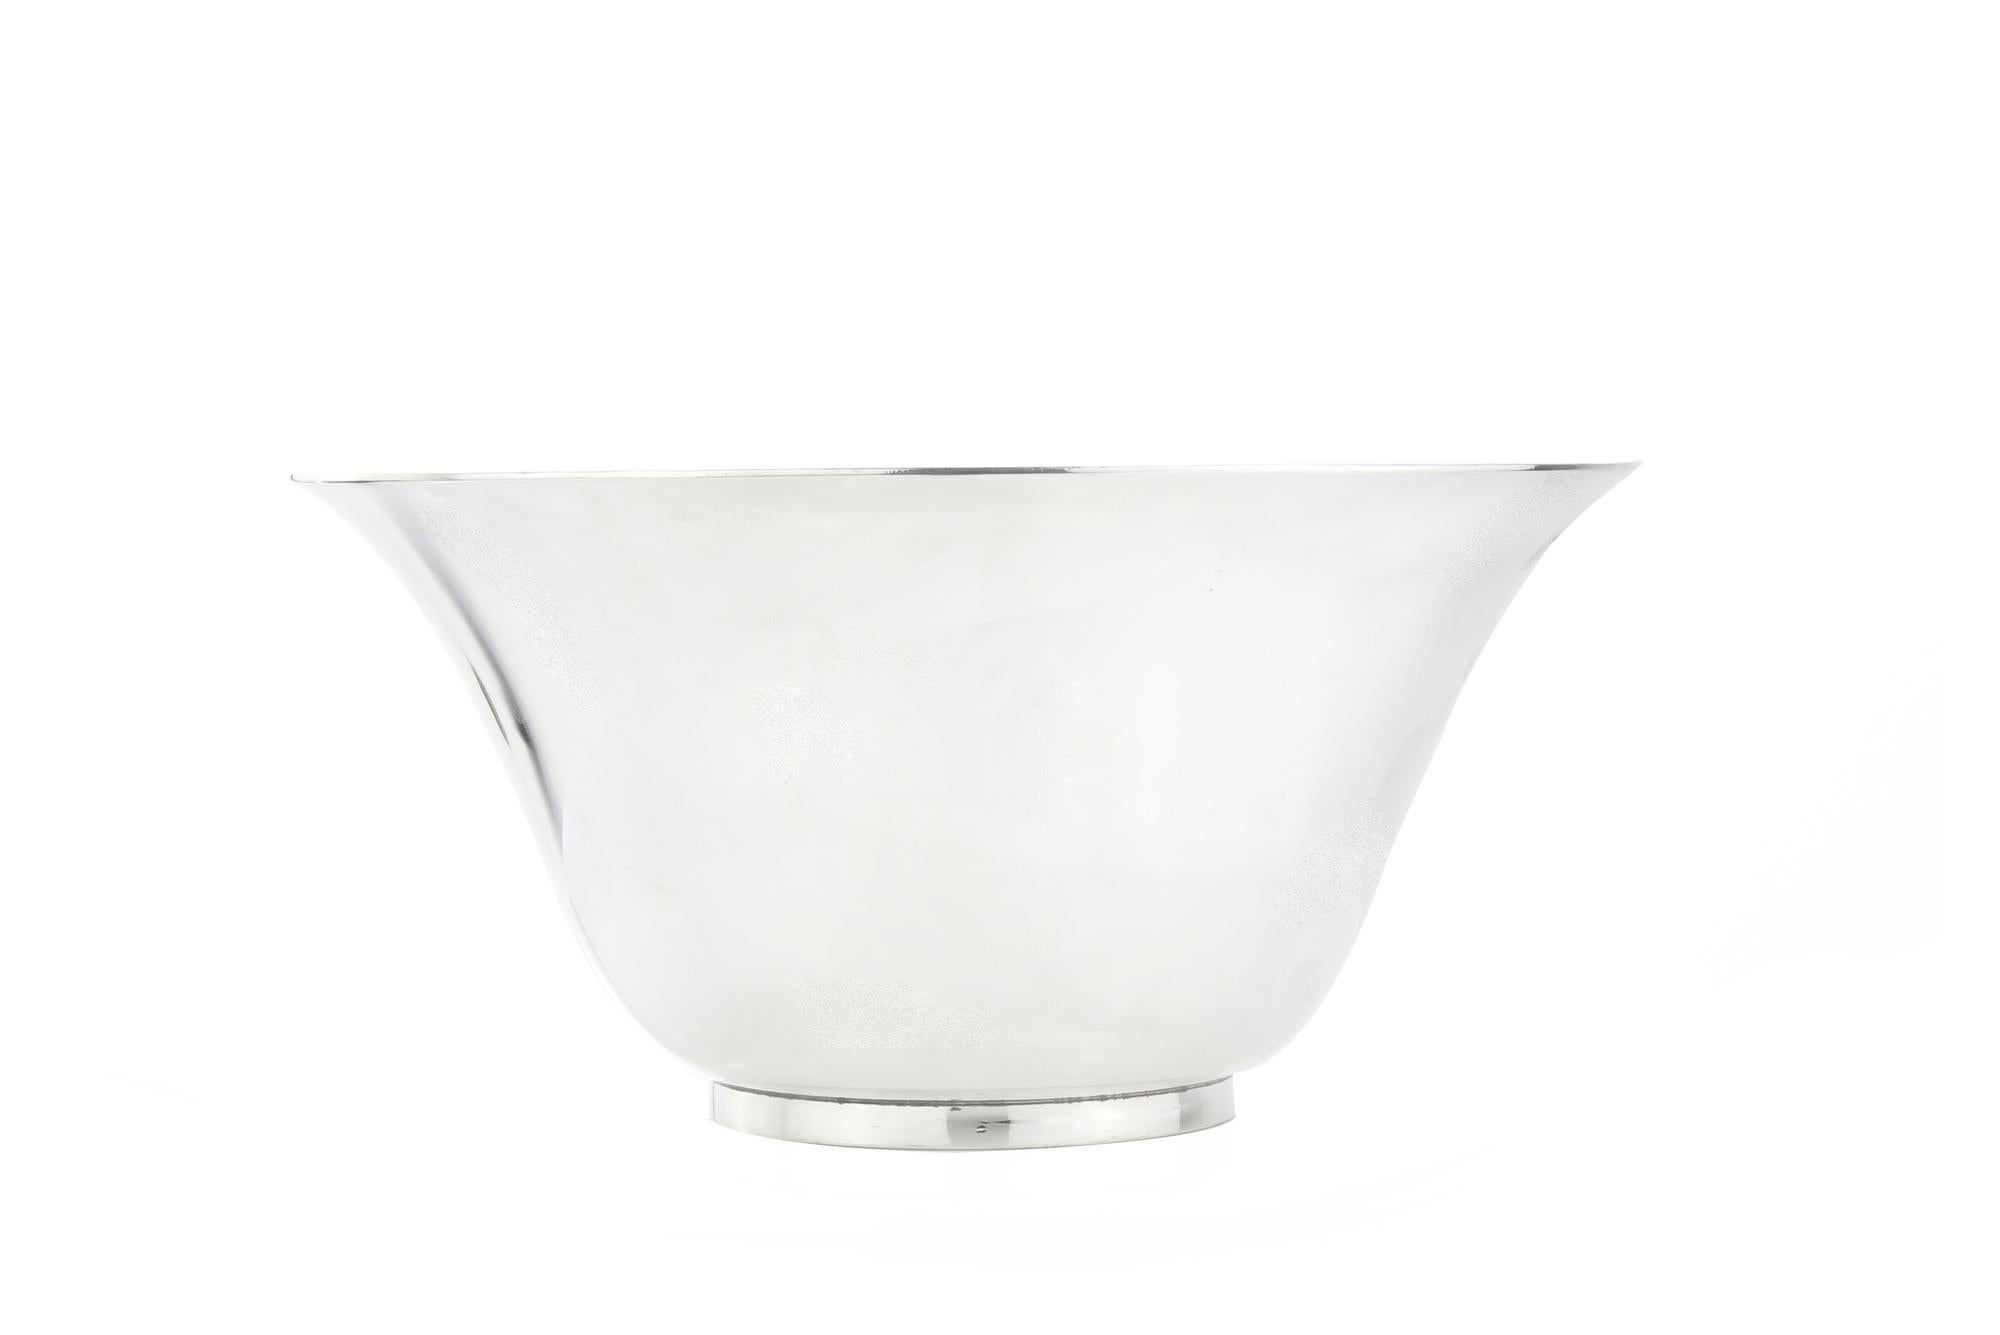 Sterling silver fruit bowl
Maker: Tiffany & Co
Designed by John C. Moore
Made in United States
Fully hallmarked.

Dimensions - 
Diameter x Weight: 23 x 11.2 cm 
Weight: 971 grams total

Condition: The bowl is pre - owned, has age related